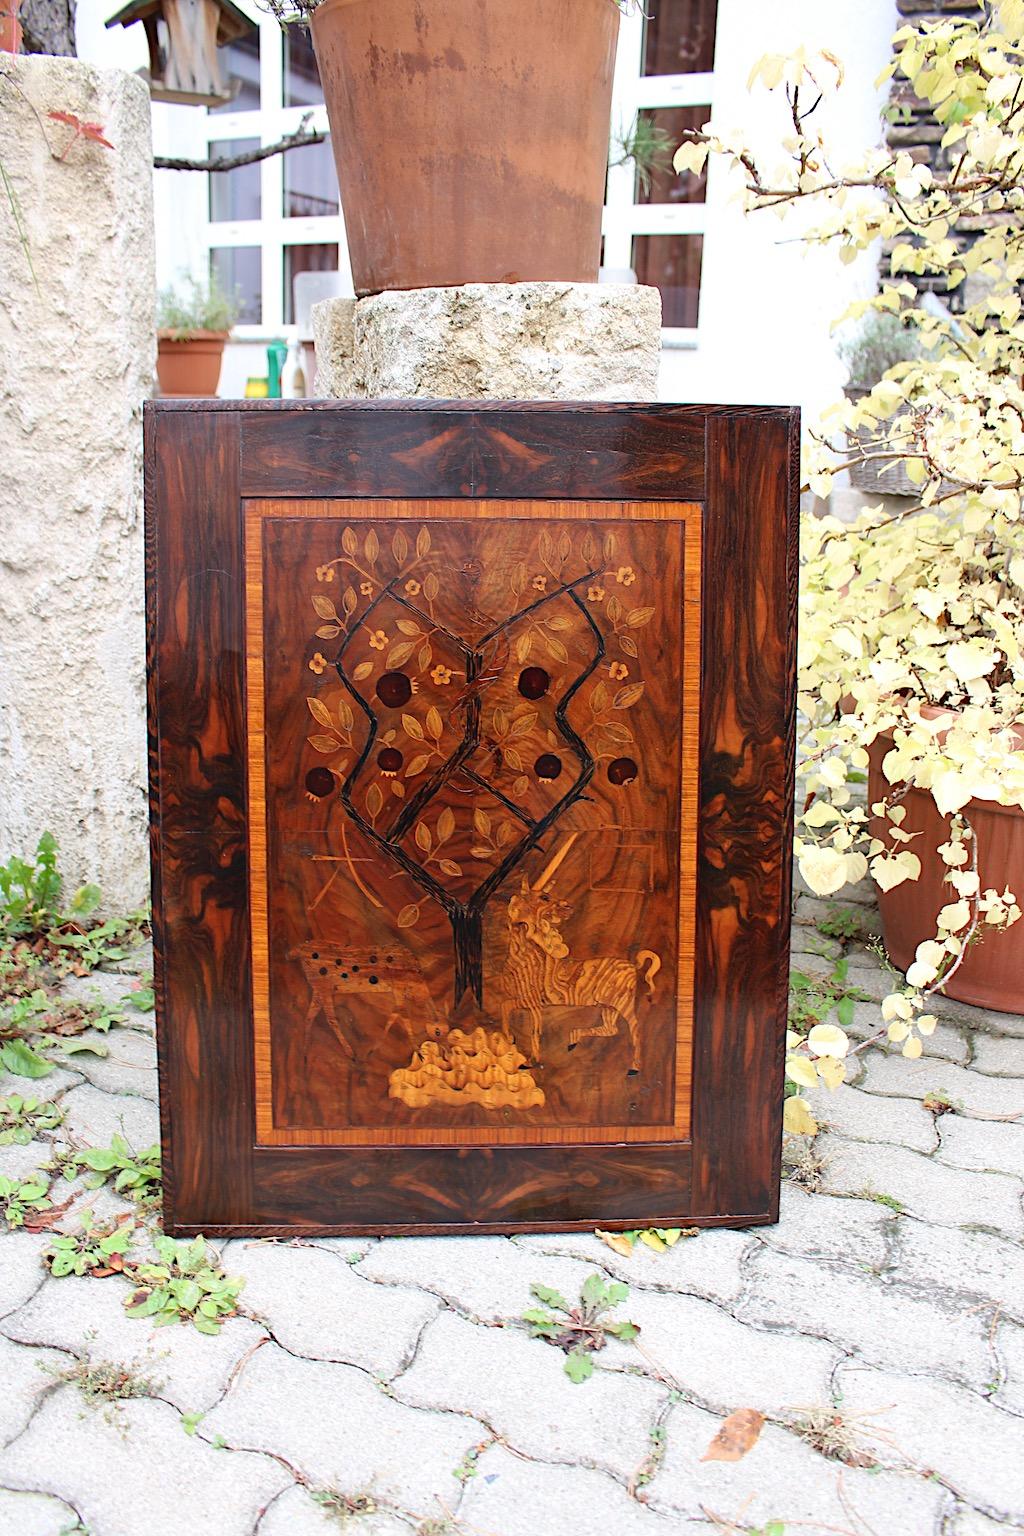 Ash Art Deco Wood Inlaid Picture Unicorn Pomegranate Tree 1920s Style Victor Lurje For Sale